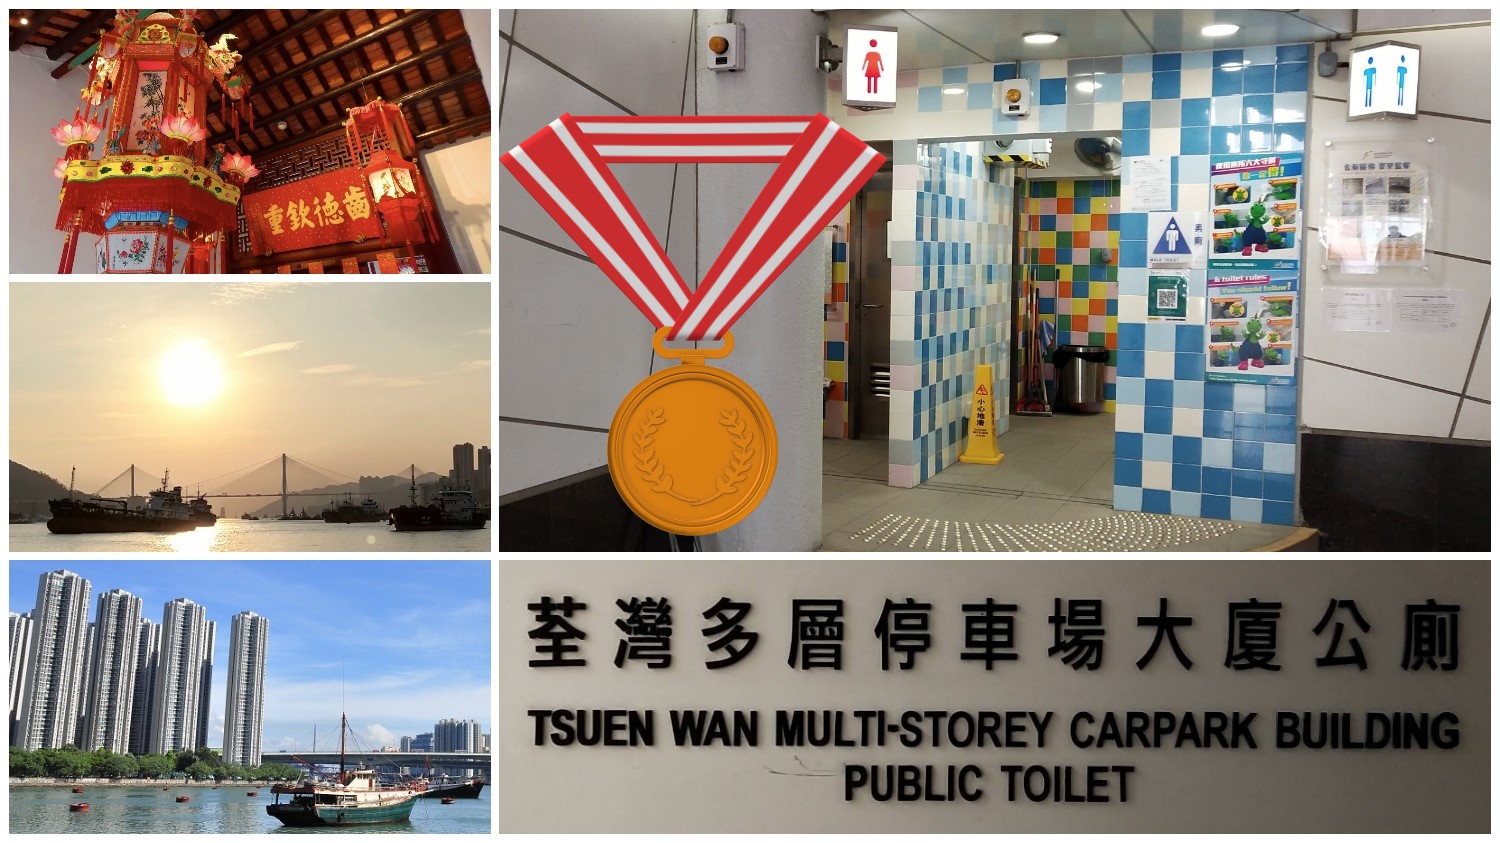 Share Frank's post about Hong Kong's best public toilet in 2020 